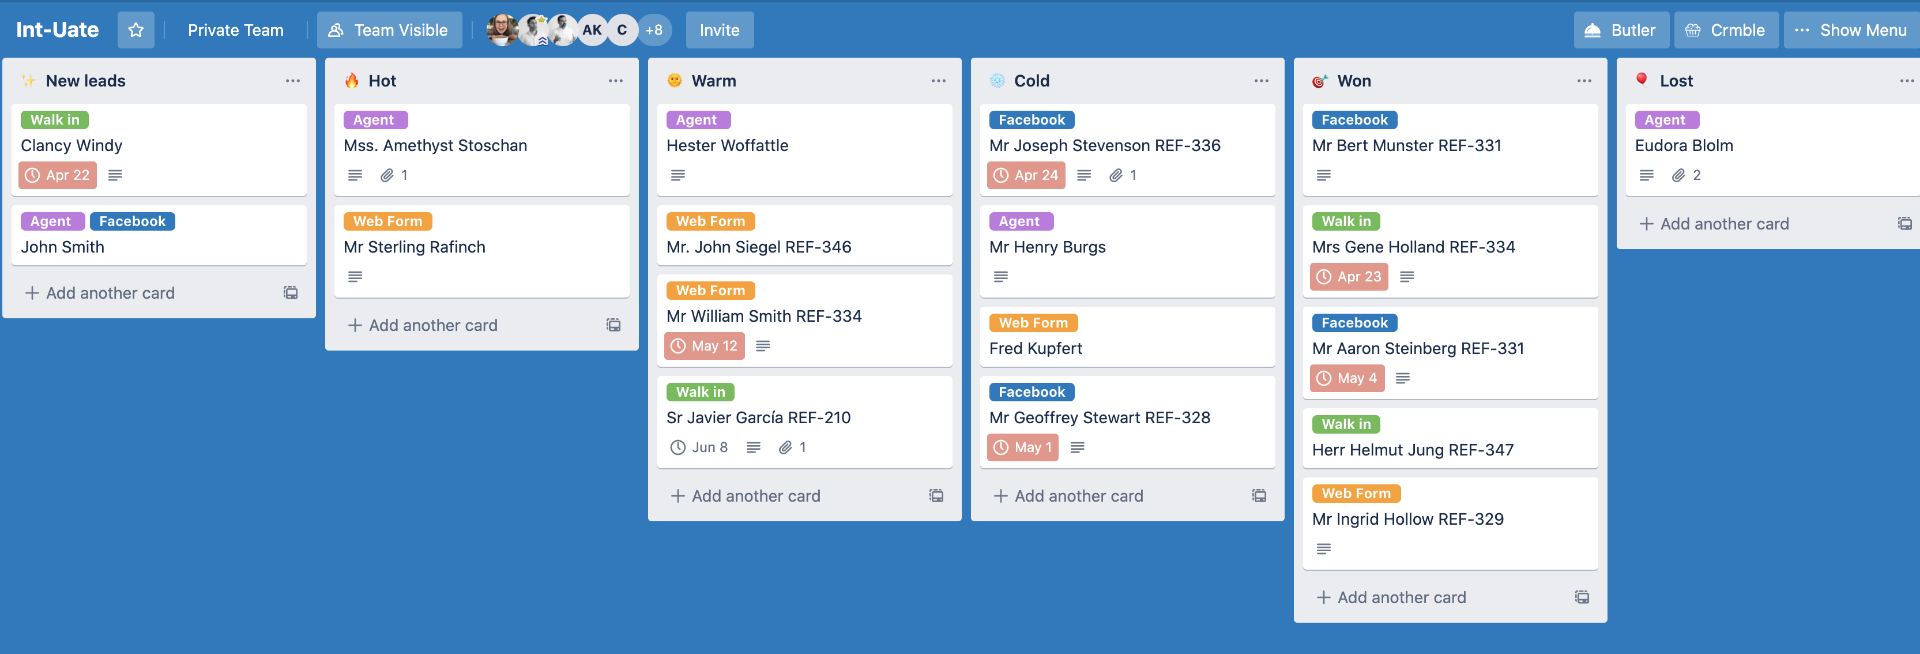 Trello- Best for Lightweight, Visually-Oriented CRM